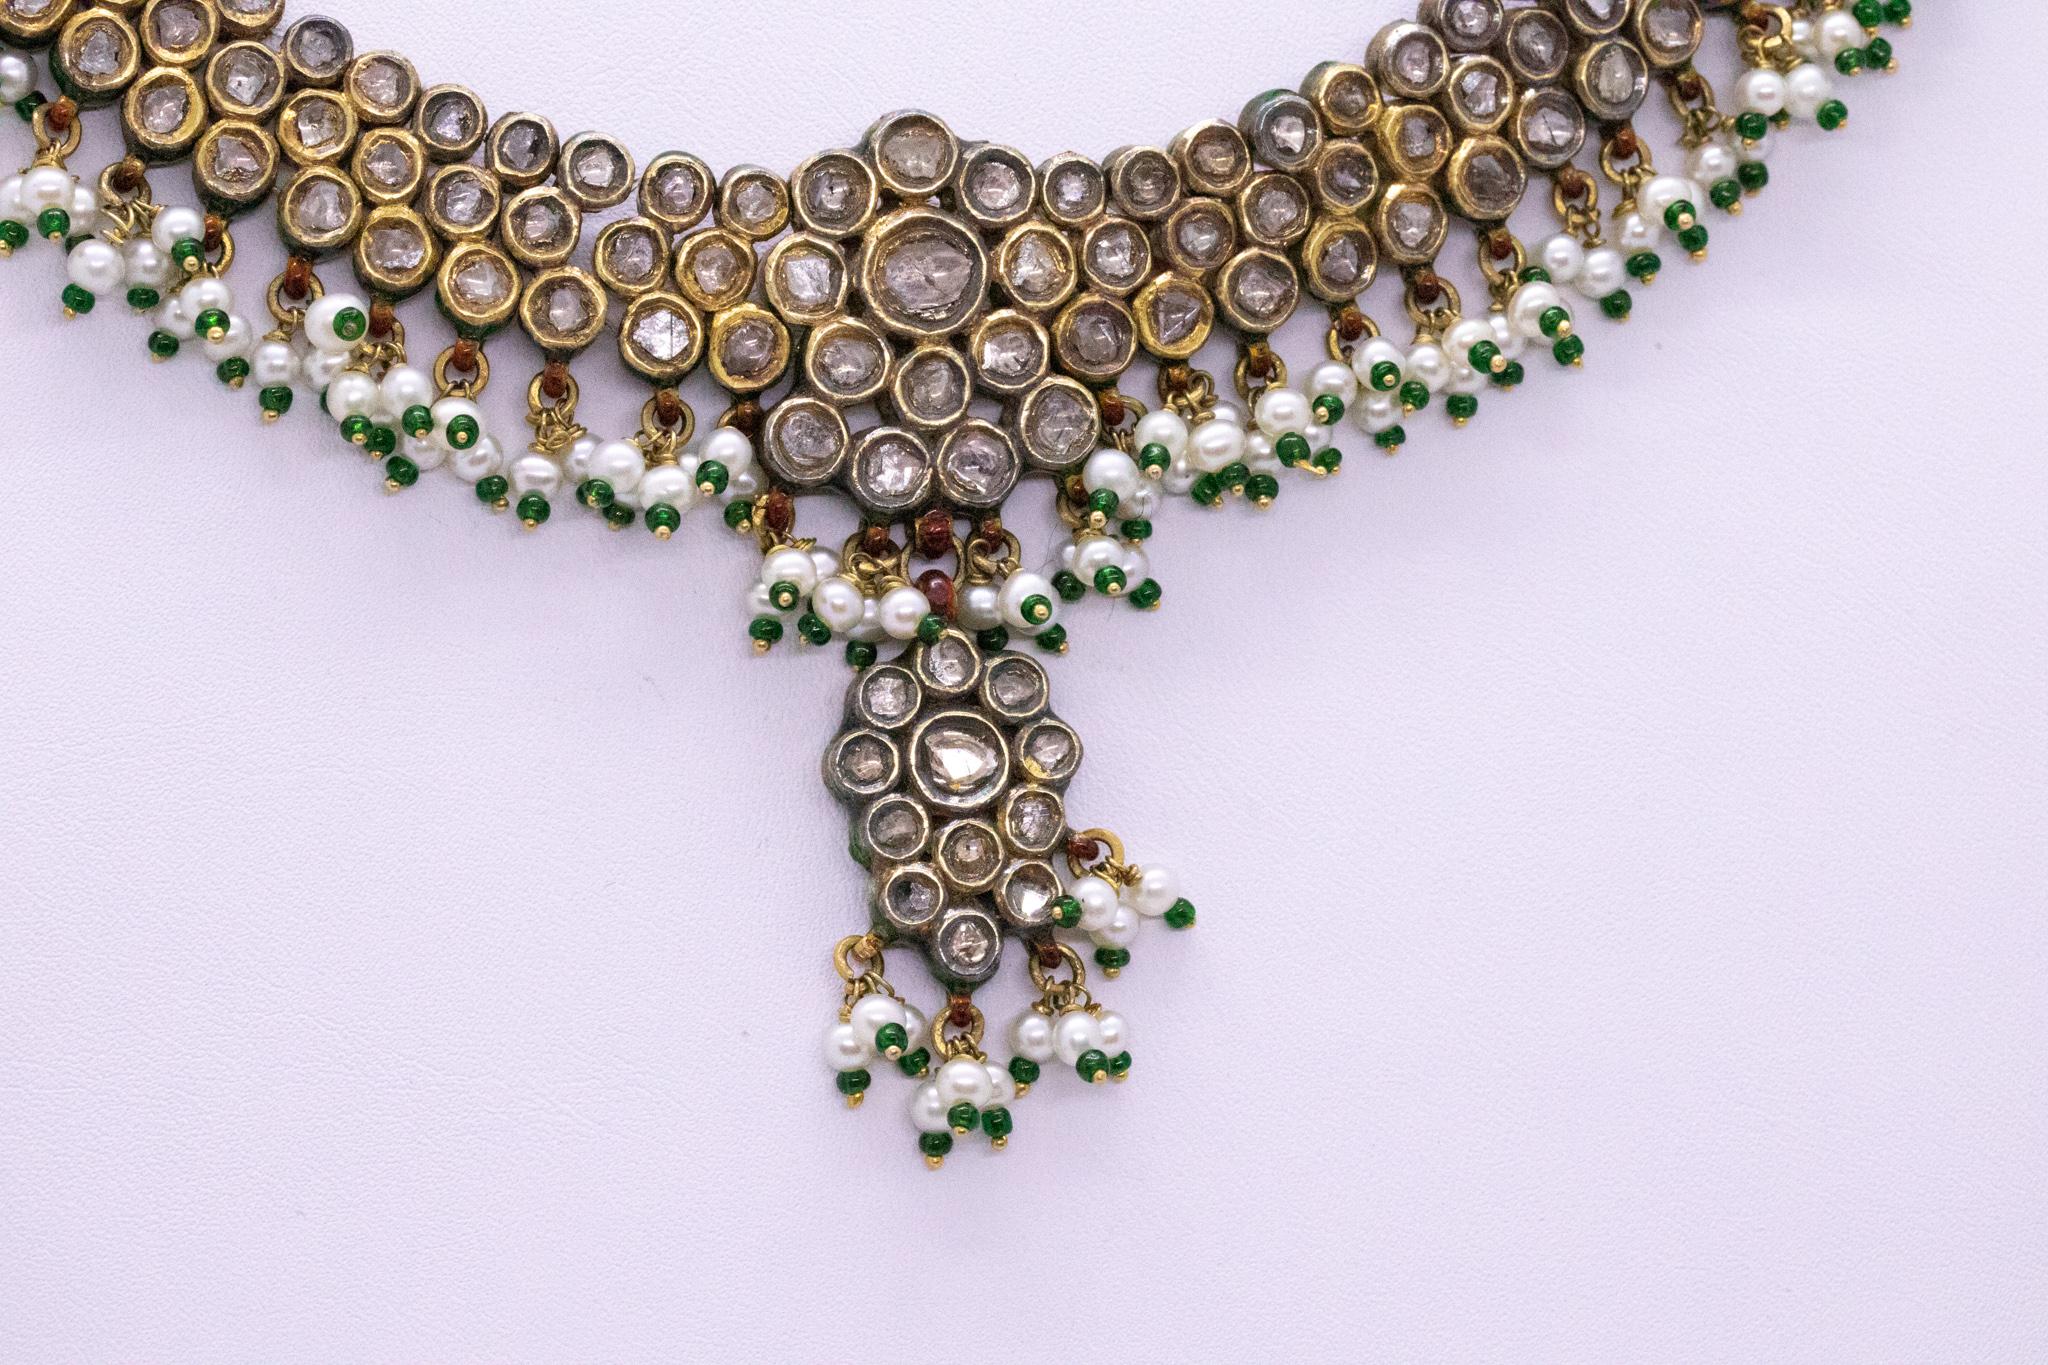 Mixed Cut Indian Mughal Court Jeweled Necklace 21Kt Gold 32.55 Cts Diamonds Emerald Pearls